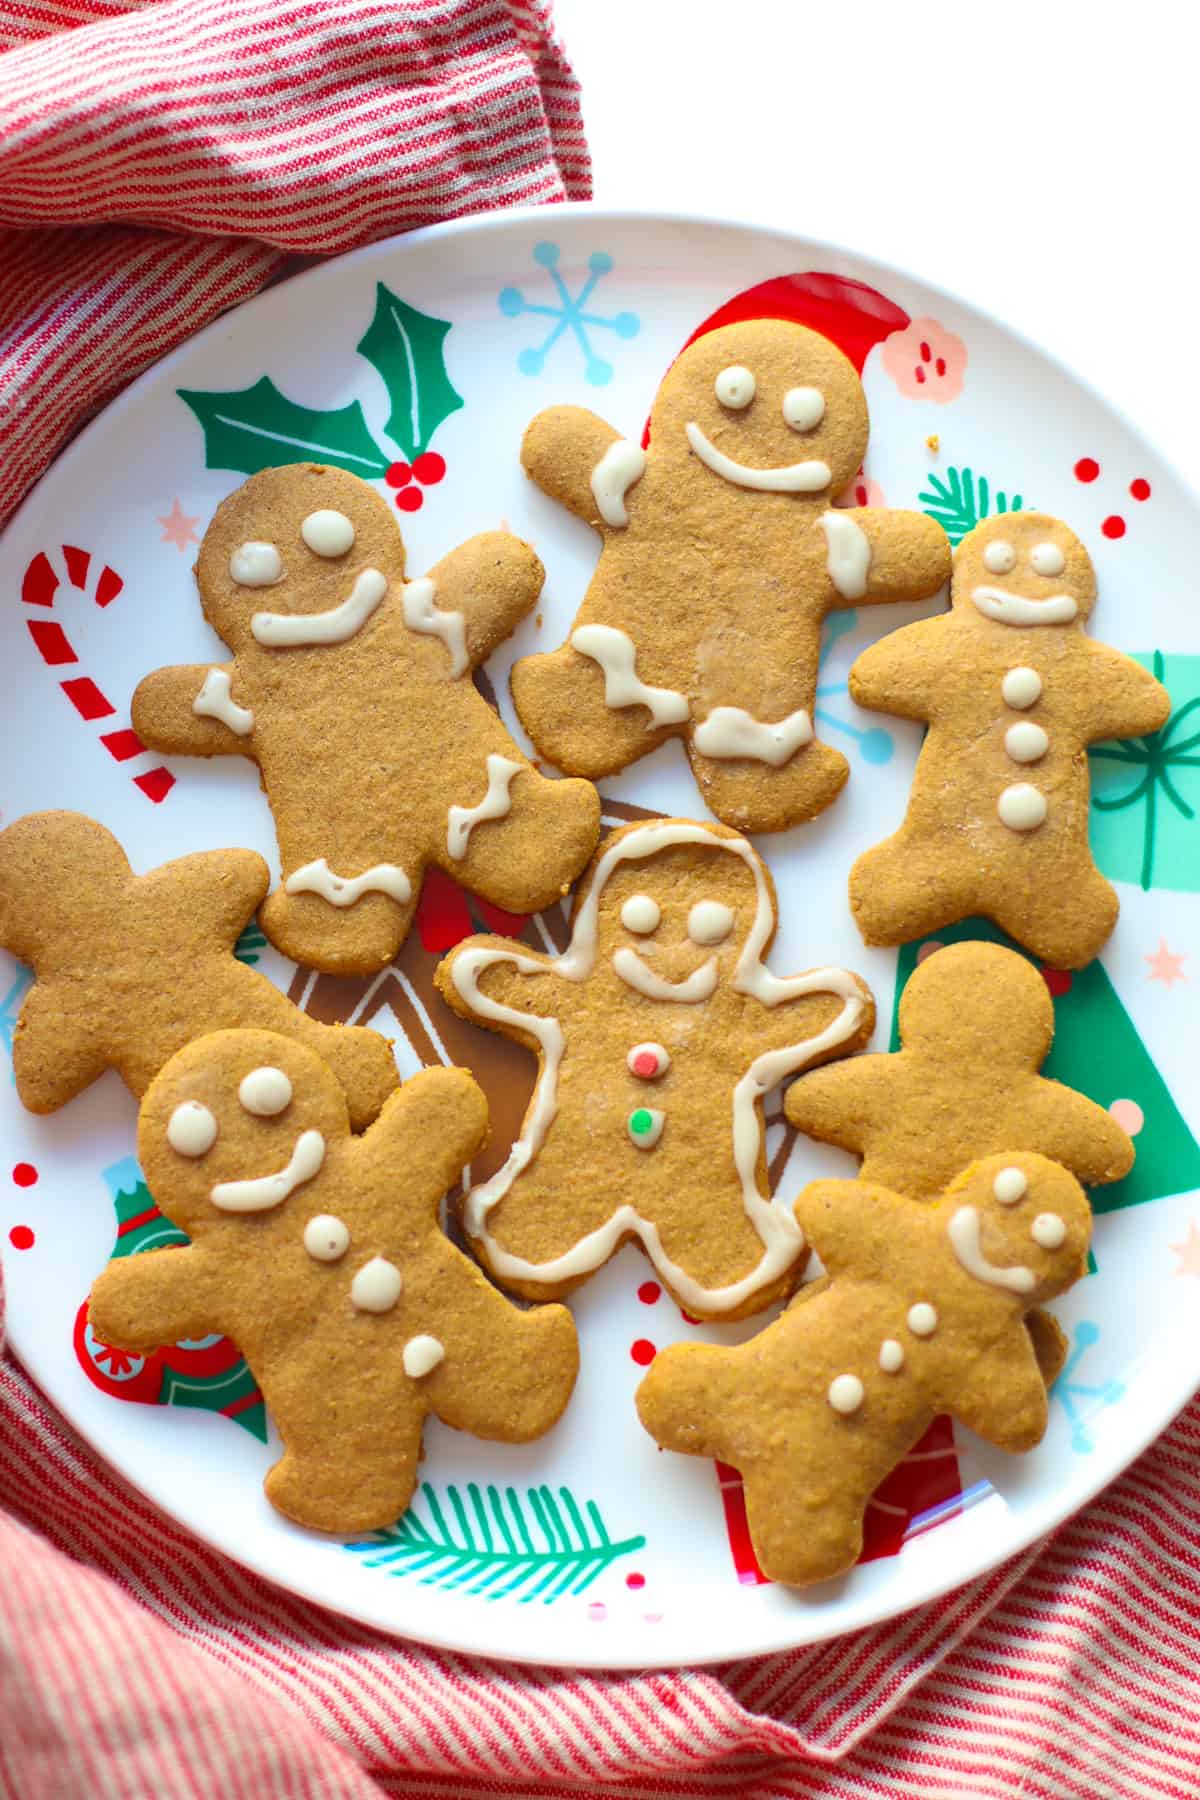 Baked and decorated gingerbread cookies on a festive plate.